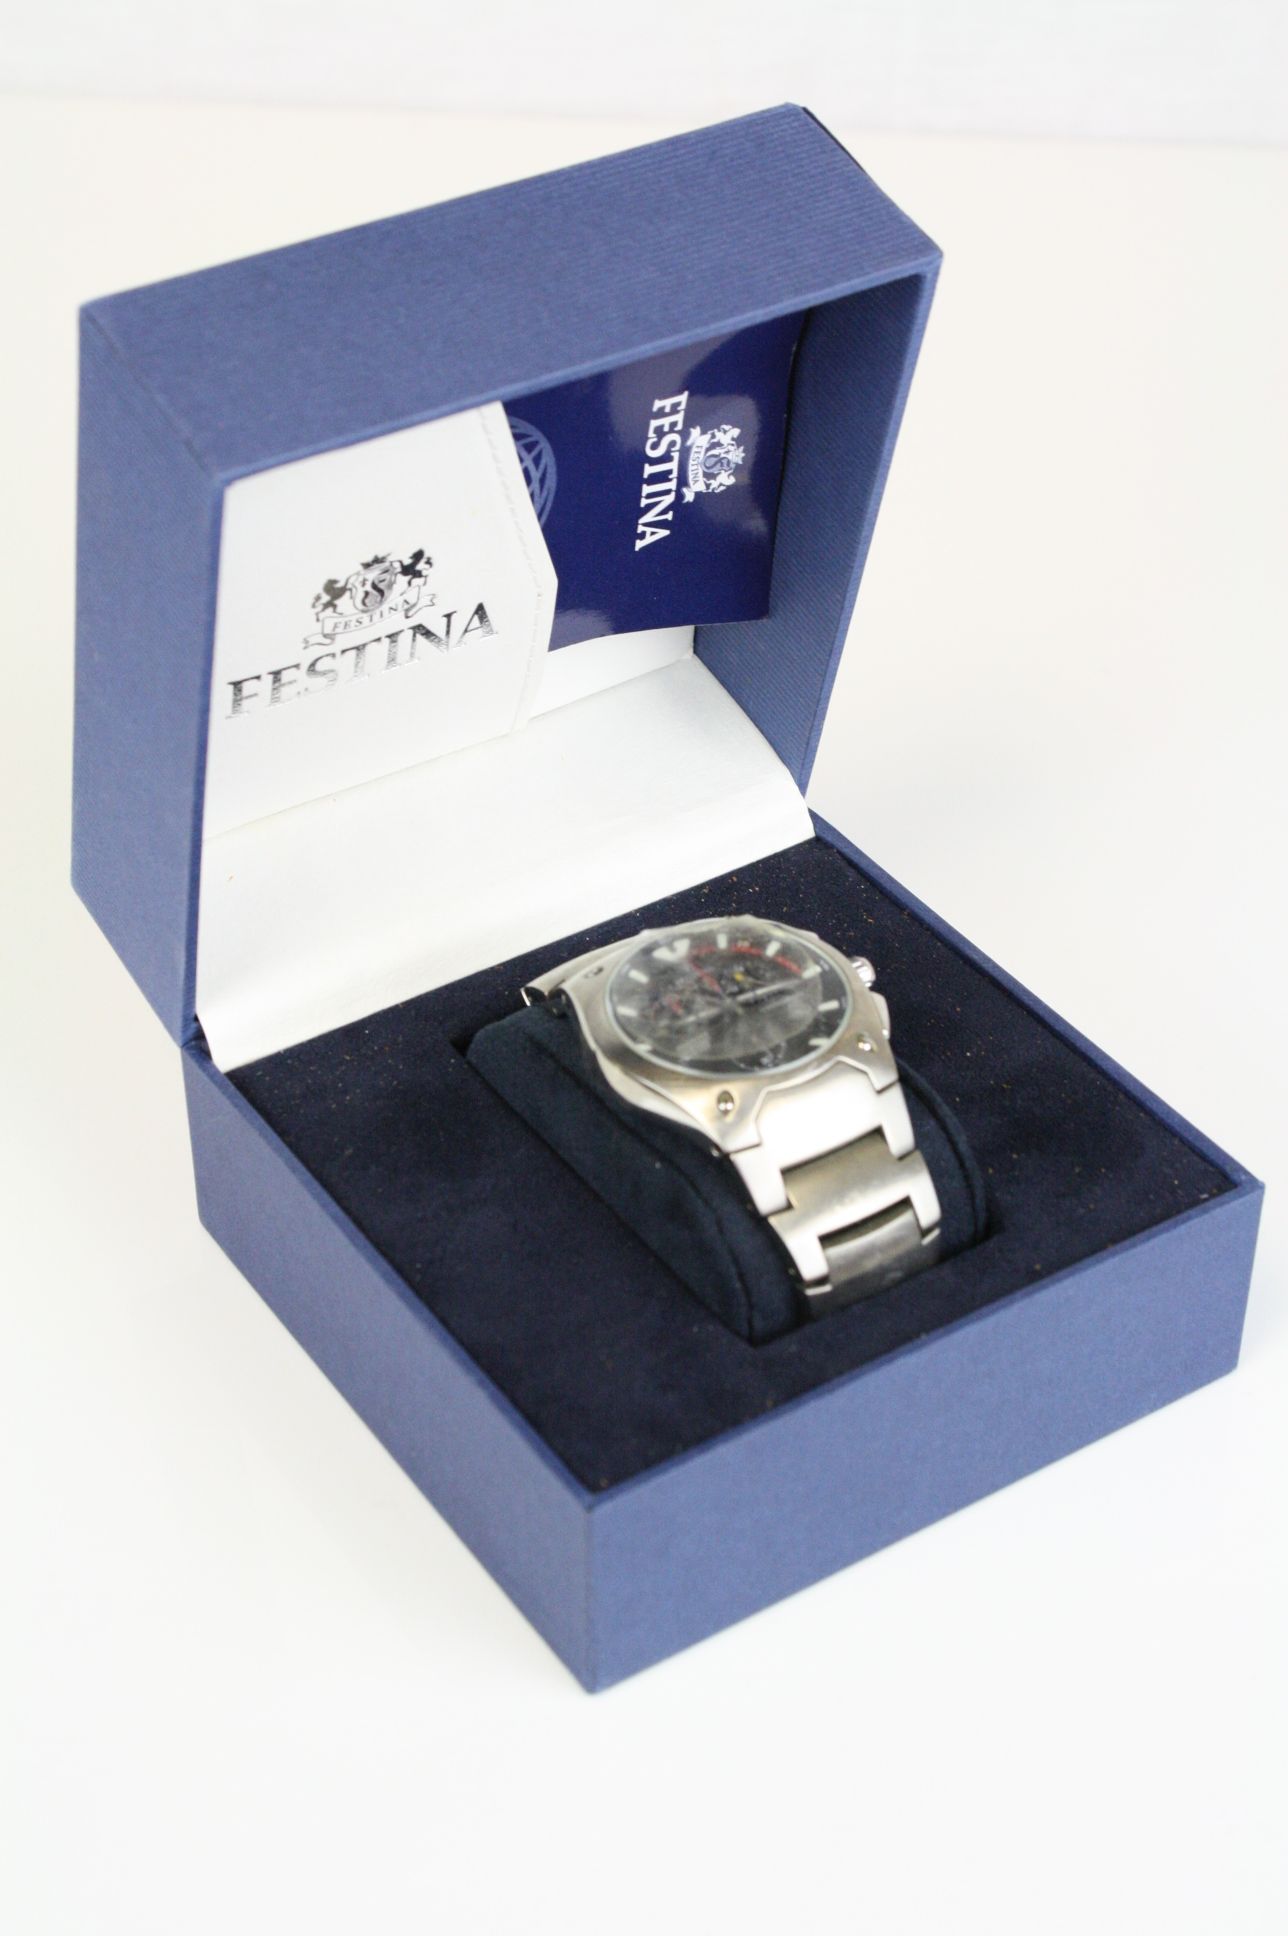 Festina MF500 chronograph gents watch in original box and documents, working at time of appraisal